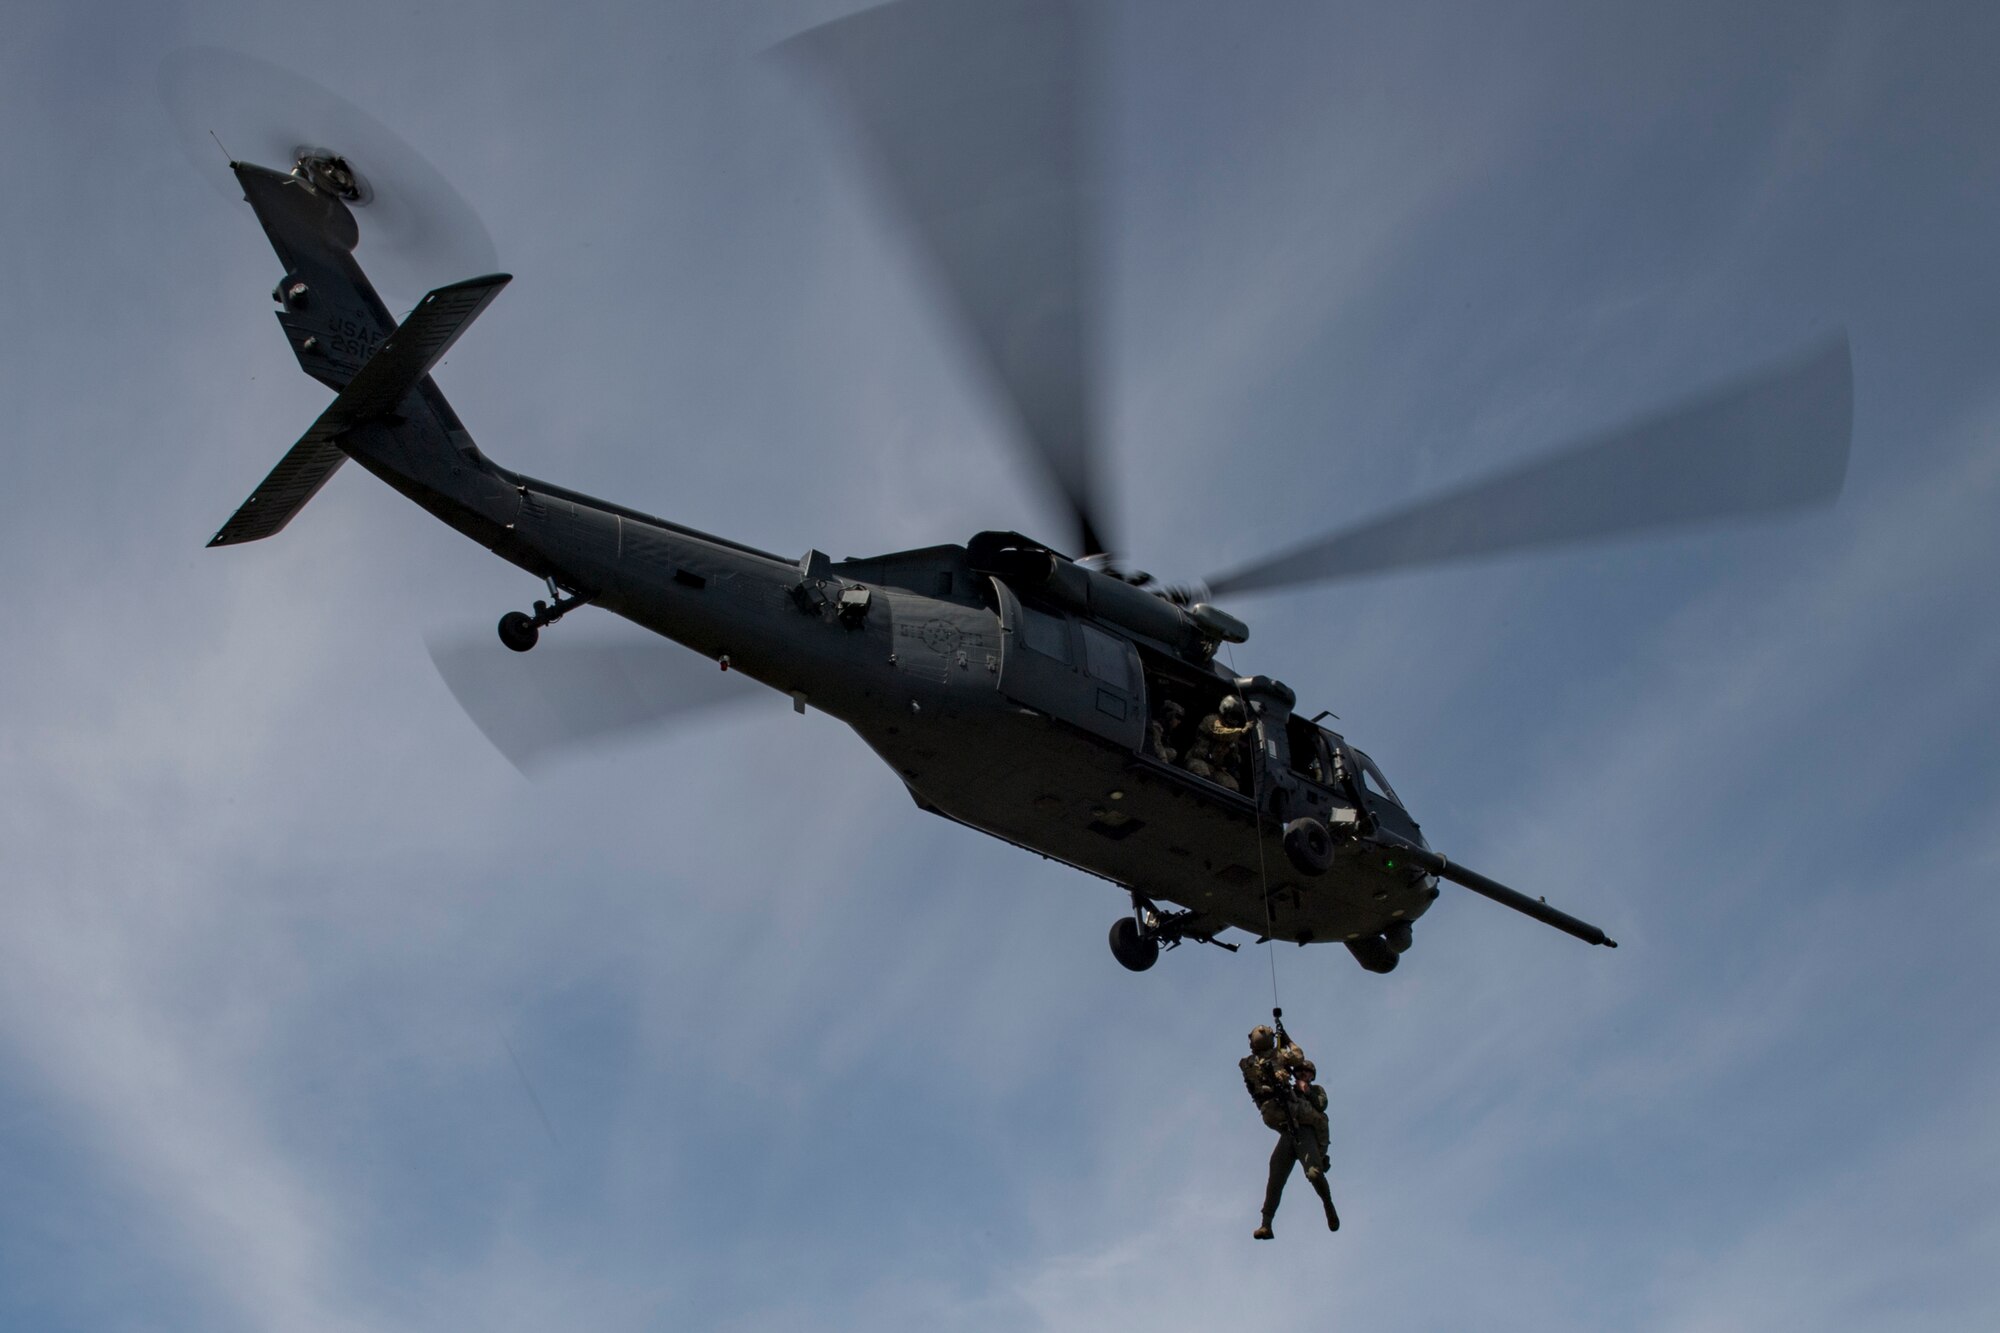 Airmen from the 55th Rescue Squadron, Davis-Monthan Air Force Base, Ariz., help a pararescueman from the 58th Rescue Squadron, Nellis Air Force Base, Nev., descend onto a drop zone during Tiger Rescue IV, March 30, 2018, at Vandenberg Air Force Base, Calif. The four-day exercise challenged Airmen from multiple rescue squadrons to bring the capabilities of the personnel recovery triad together to successfully complete rescue missions and maintain proficiency. The three branches of the personnel recovery triad are the HC-130J Combat King II, HH-60G Pave Hawk and the guardian angel weapons system or pararescuemen. (U.S. Air Force photo by Tech. Sgt. Zachary Wolf)